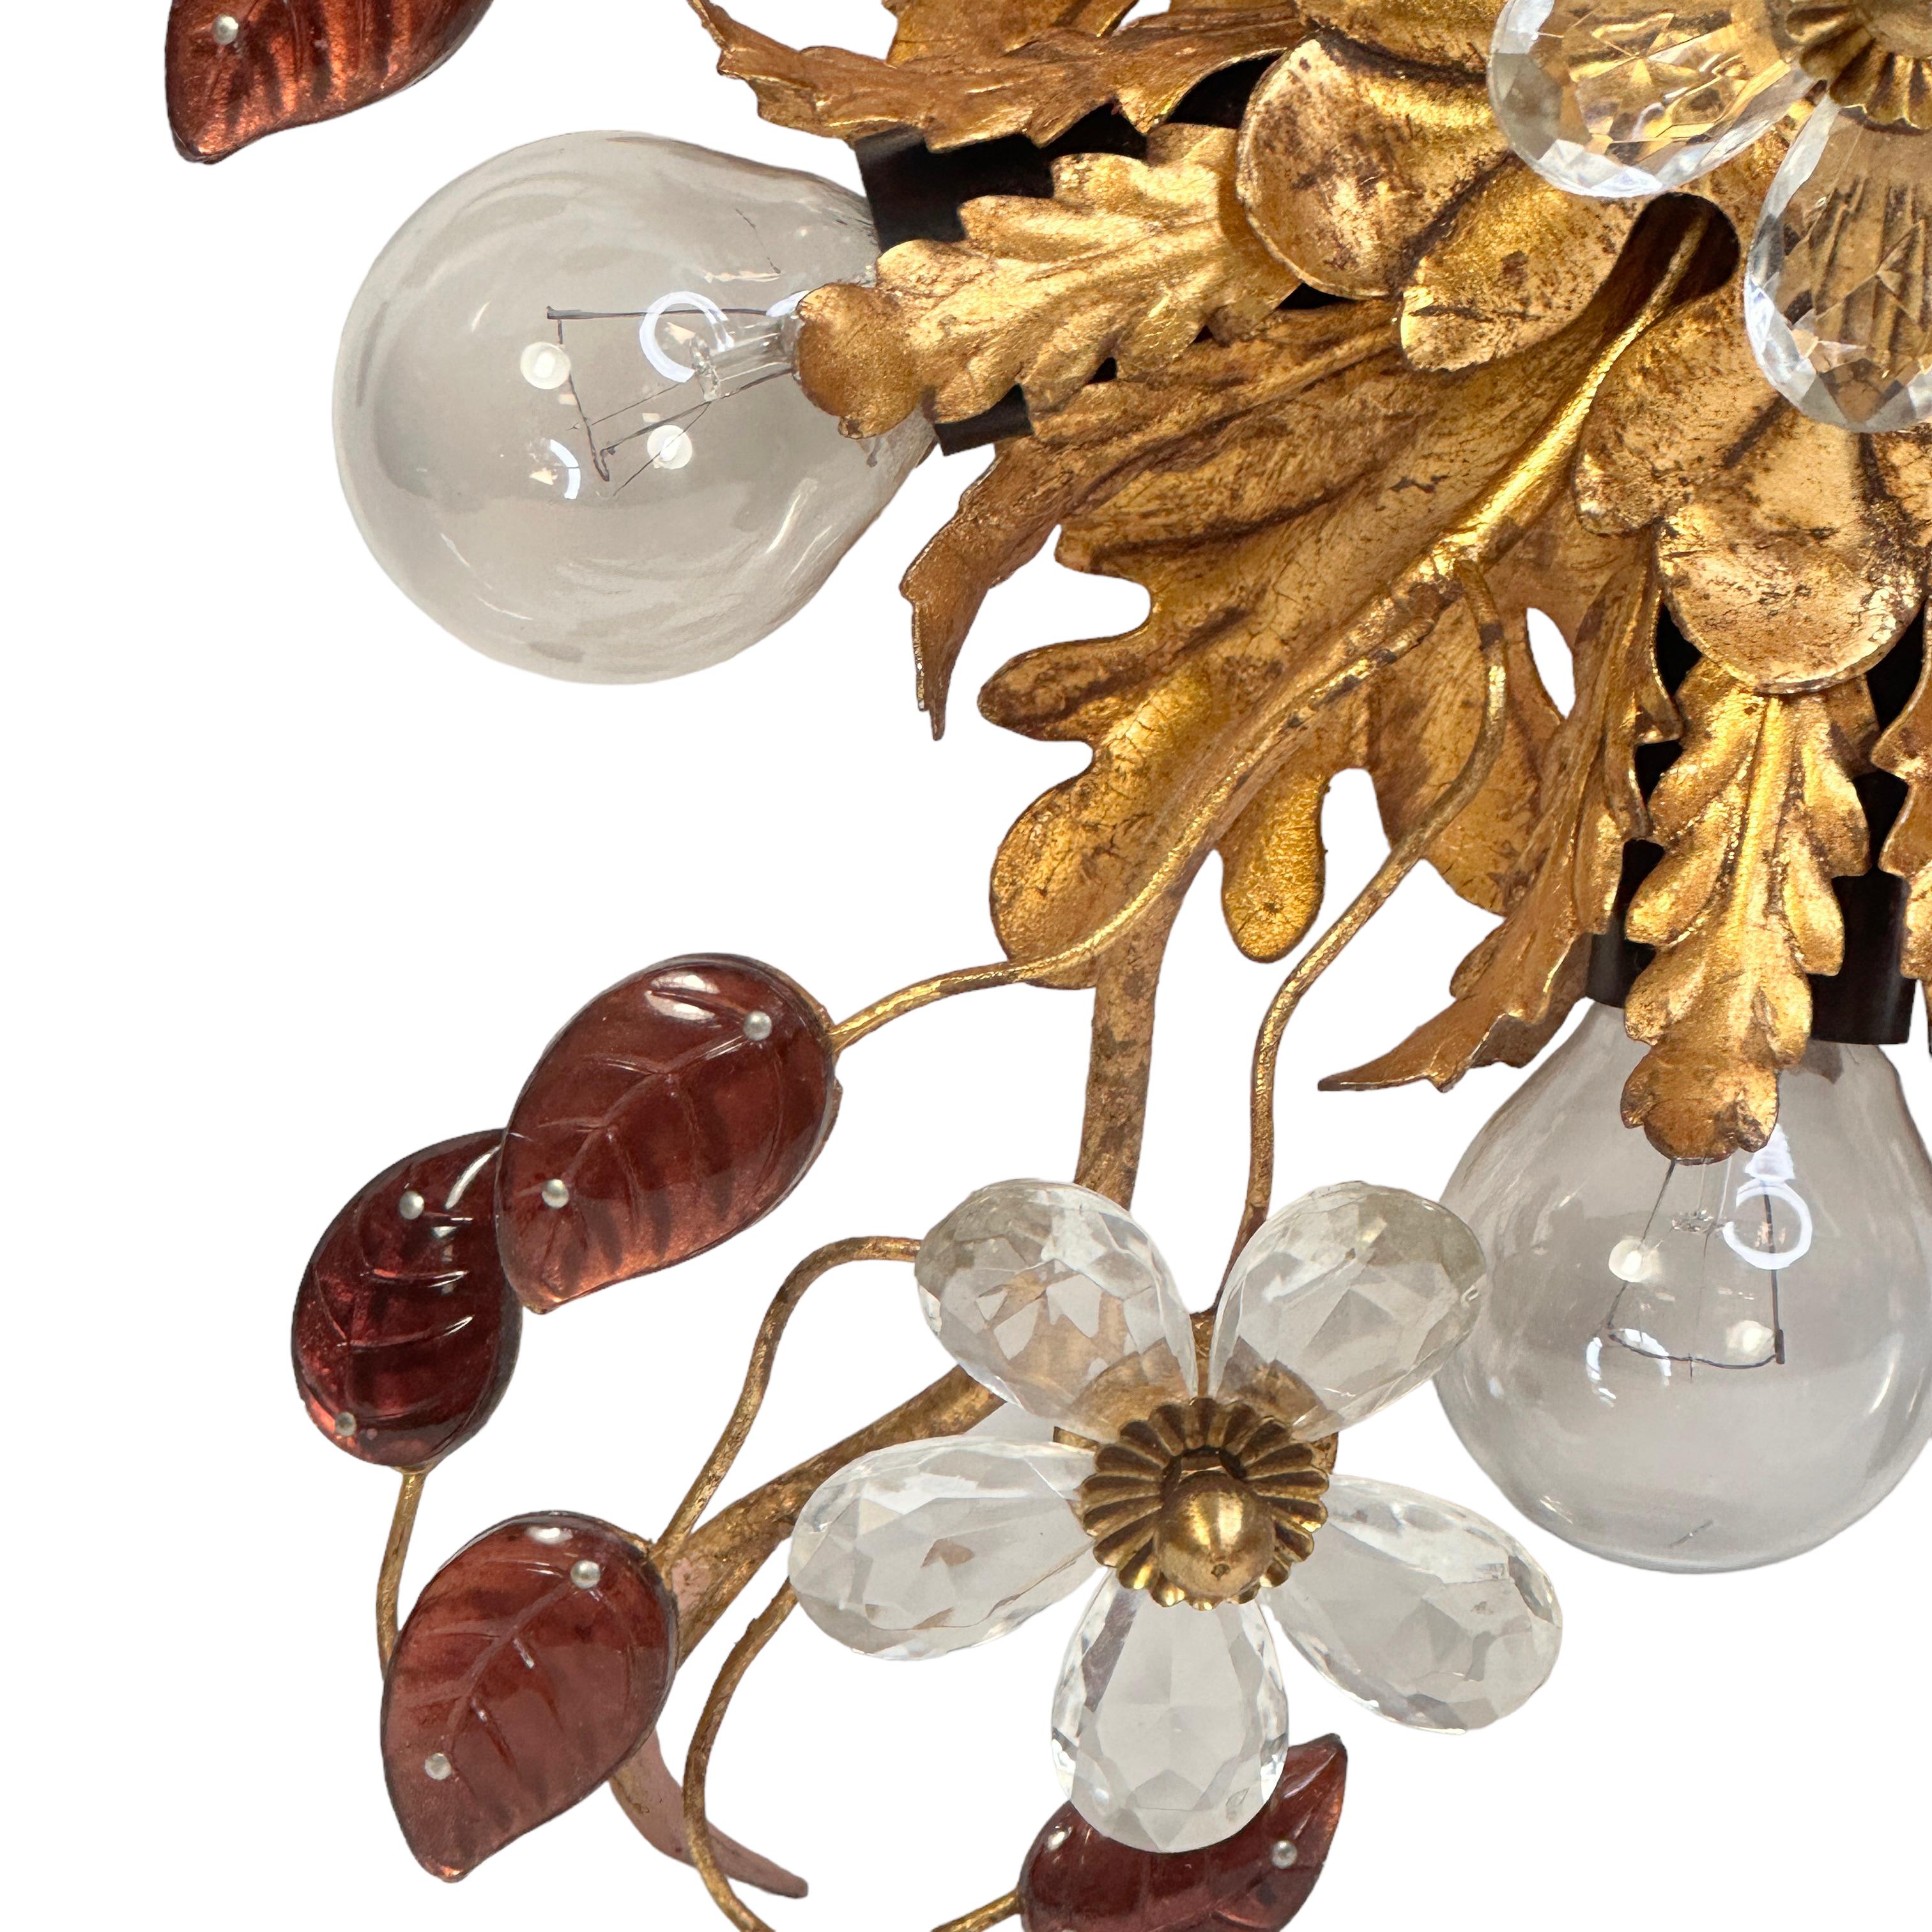 Add a touch of opulence to your home with this charming flush mount light. Perfect stunning gilt acanthus leaf design with clear Murano glass flowers and colored Murano glass leaves on fine gilt stems, to enhance any chic or eclectic home. We'd love